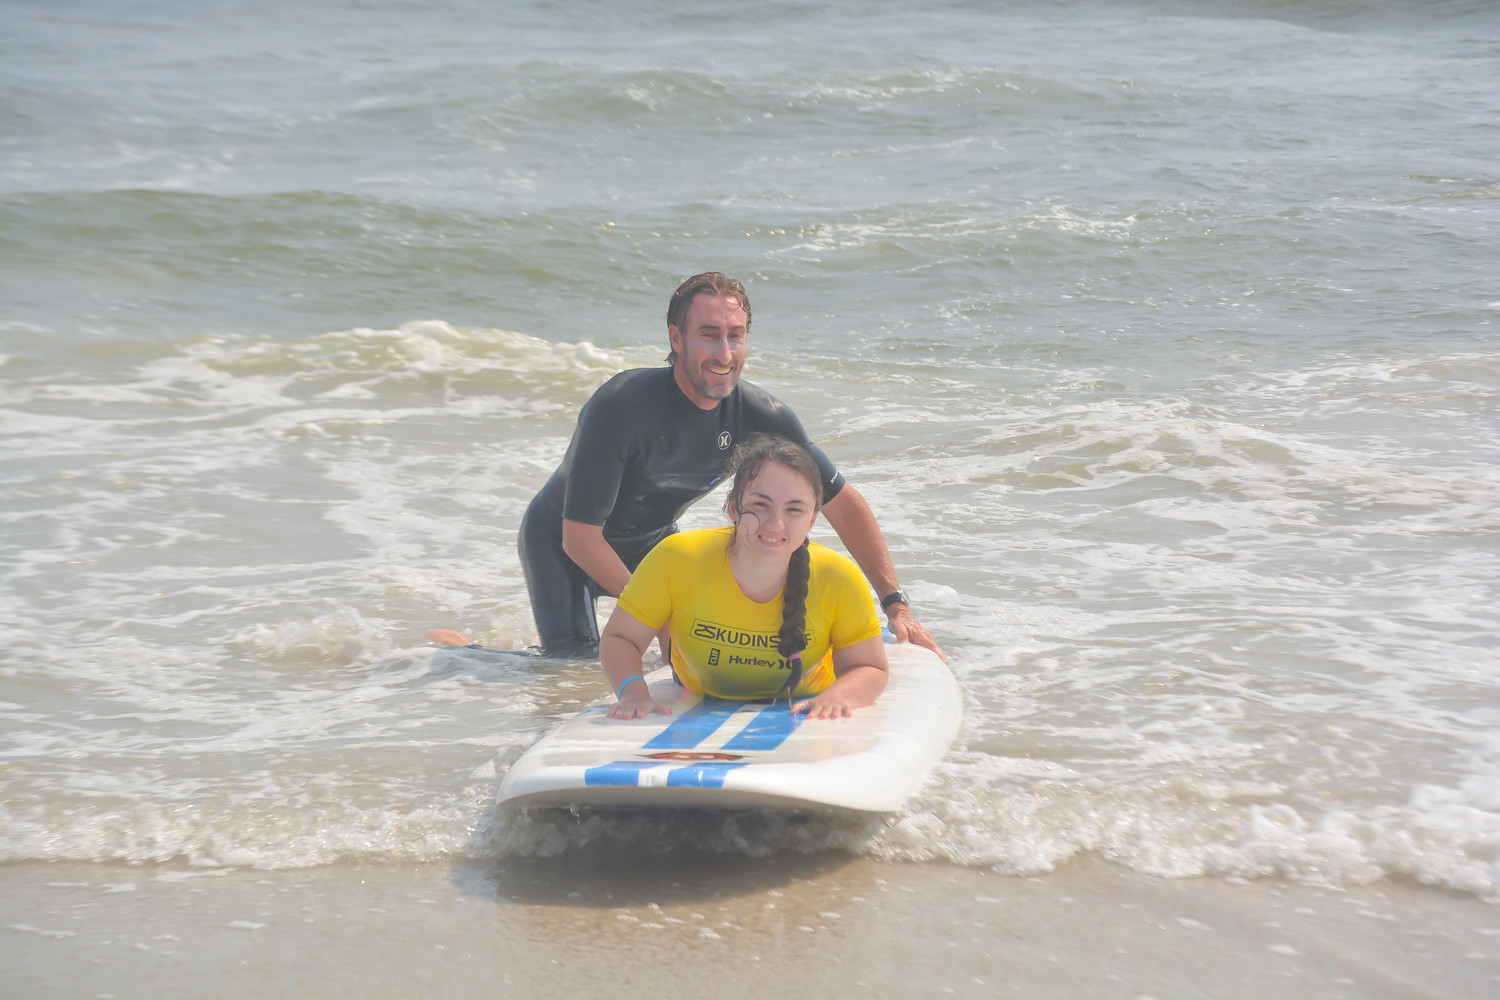 Sidorela Lleshi said she had a wonderful time surfing with the help of Skudin Surf instructor Adam Dufner during a trip to Long Beach sponsored by the Adaptive Sports Academy at the Hospital for Special Surgery on Aug. 15.